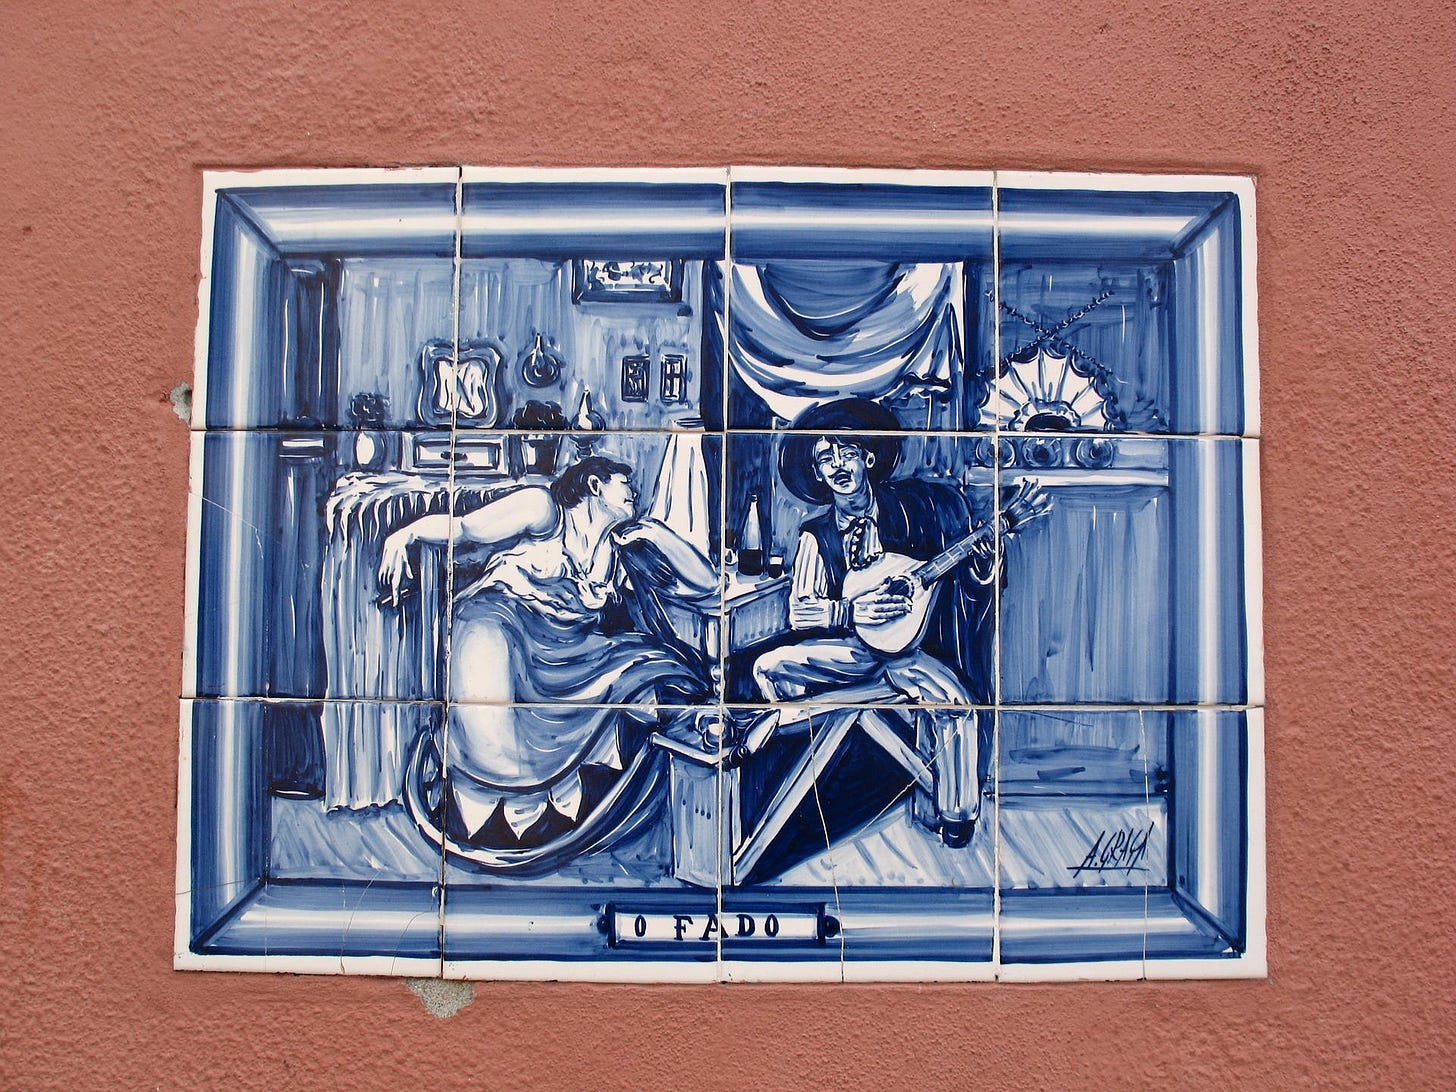 Tile with musicians